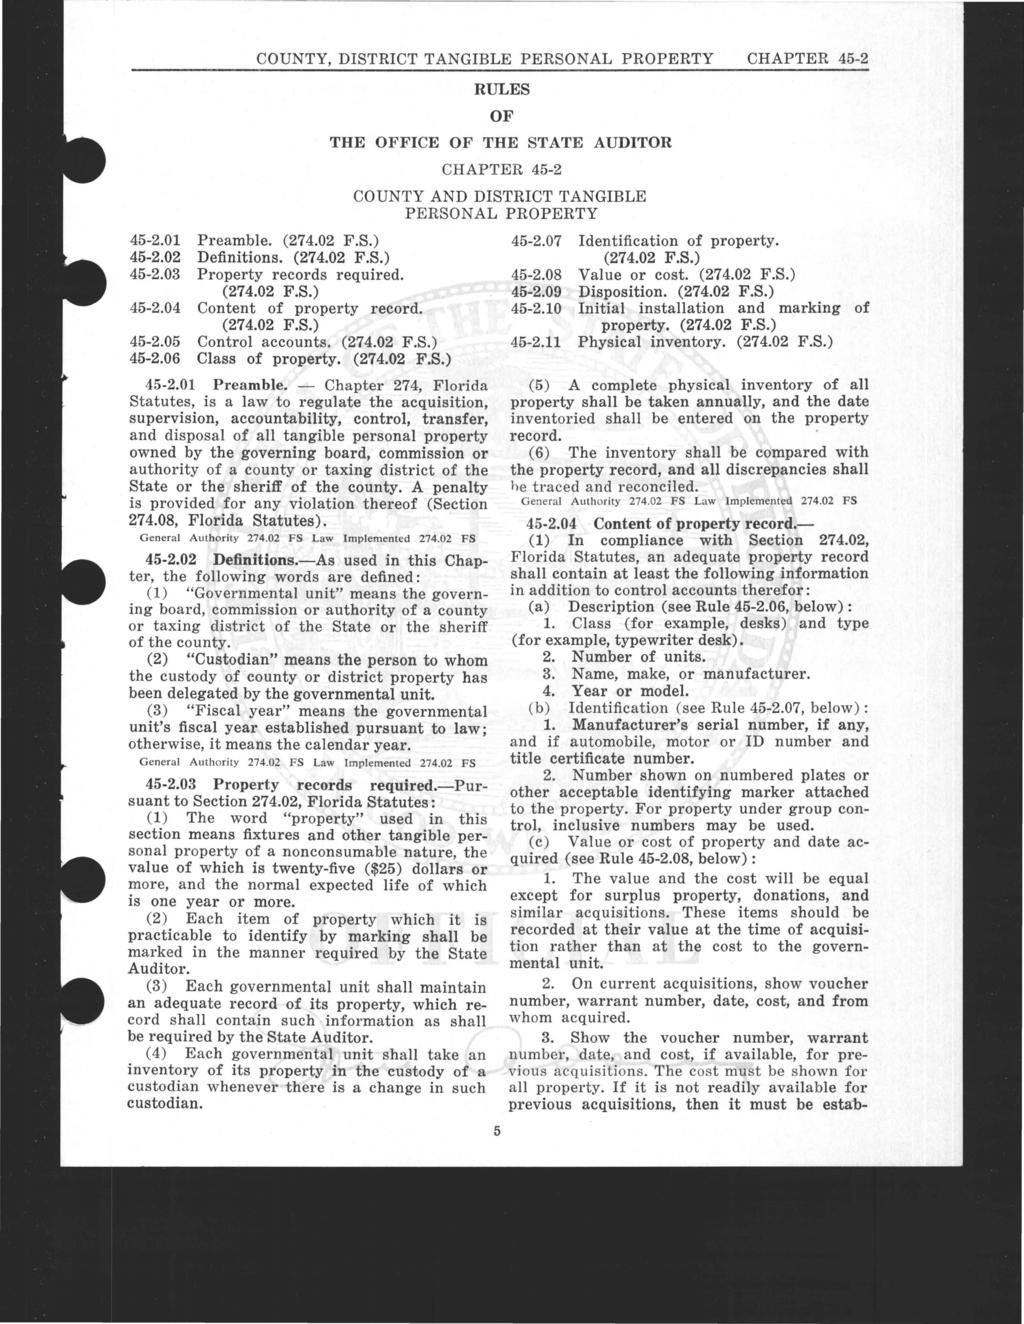 COUNTY, DISTRICT TANGIBLE PERSONAL PROPERTY CHAPTER 45-2 45-2.01 Preamble. (274.02 F.S.) 45-2.02 Definitions. (274.02 F.S.) 45-2.03 Property records required. (274.02 F.S.) 45-2.04 Content of property record.